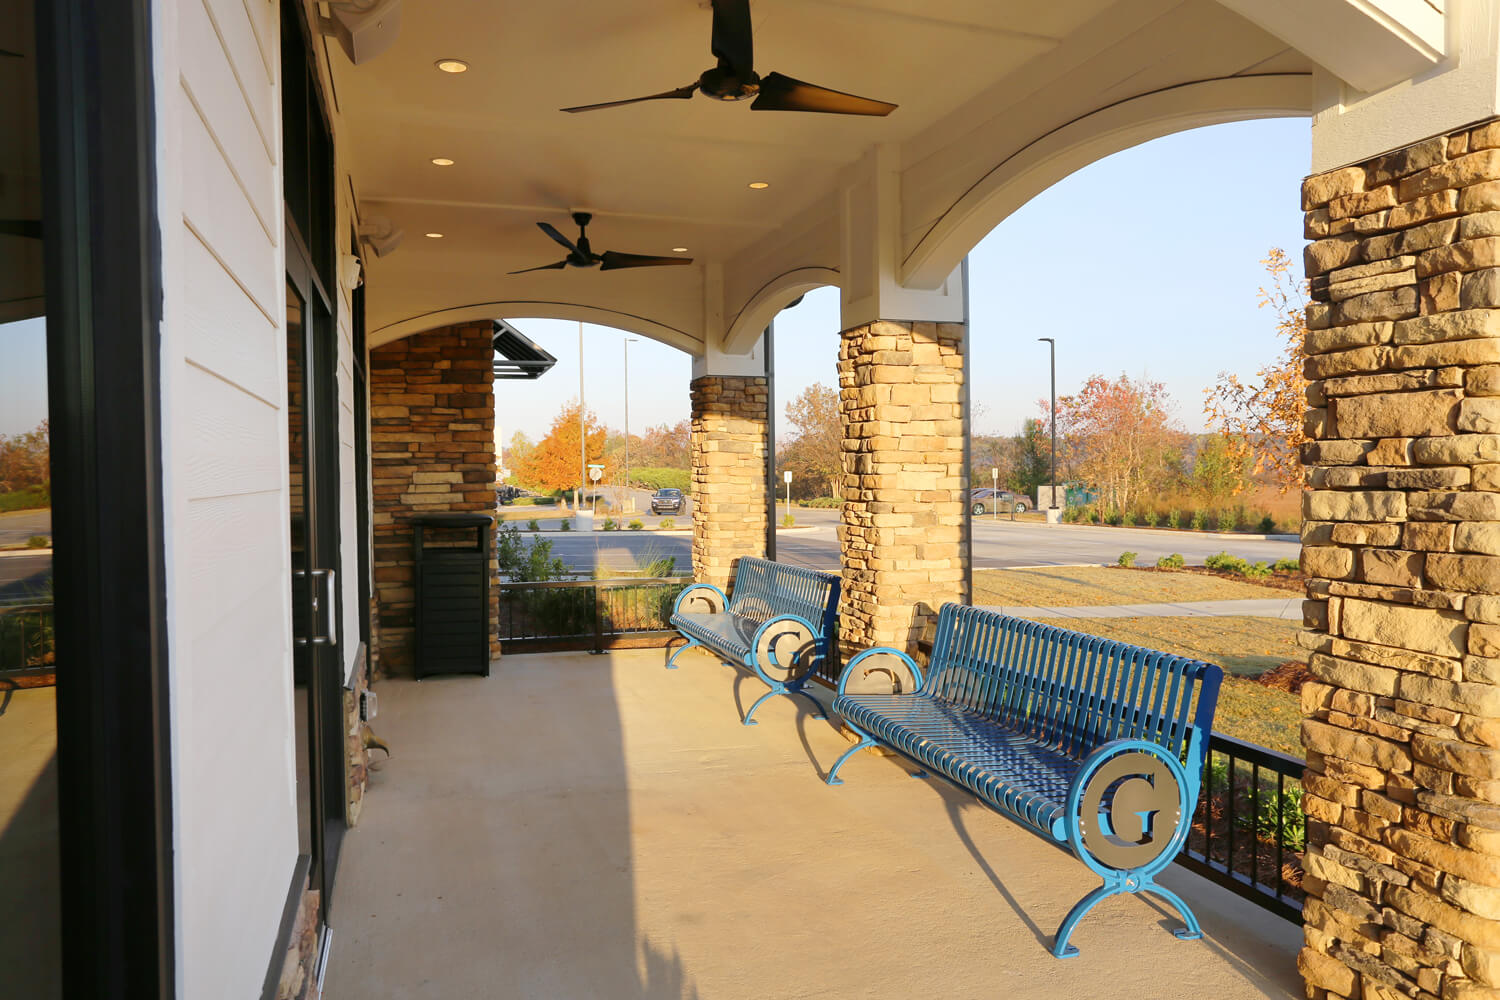 Guardian Credit Union - Wetumpka - Covered Patio - Designed by Foshee Architecture